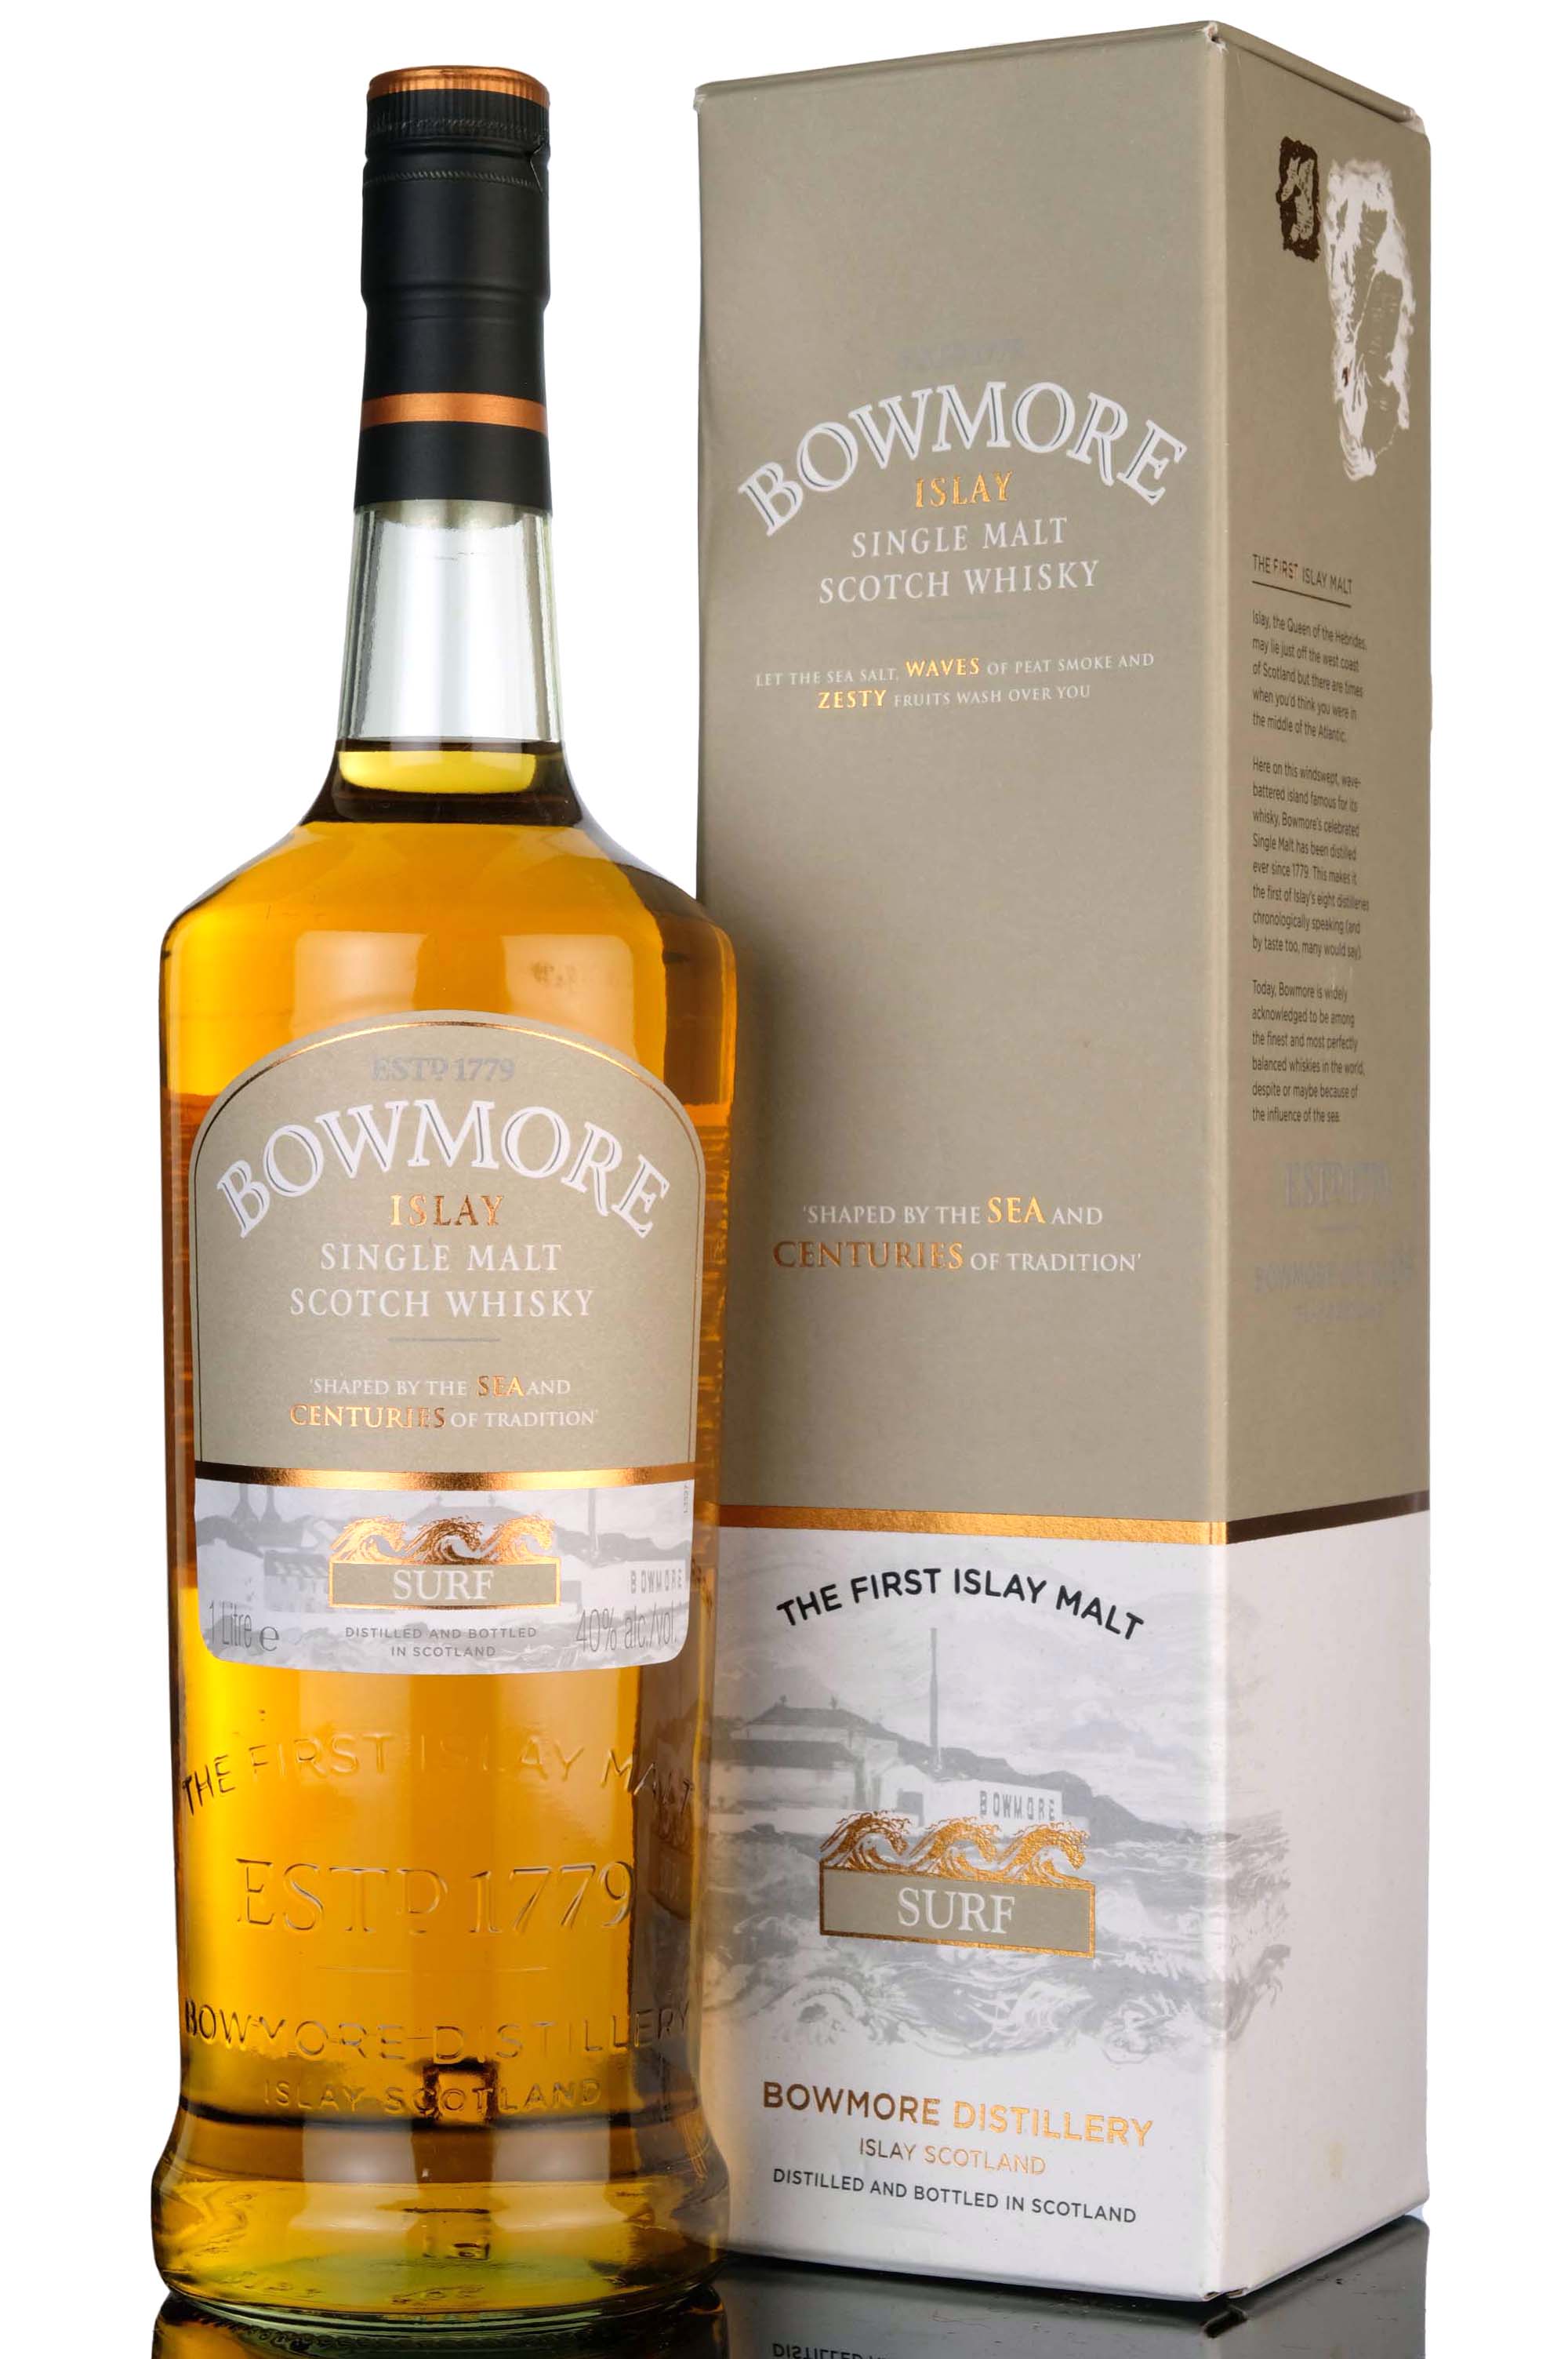 Bowmore Surf - Late 2000s - 1 Litre